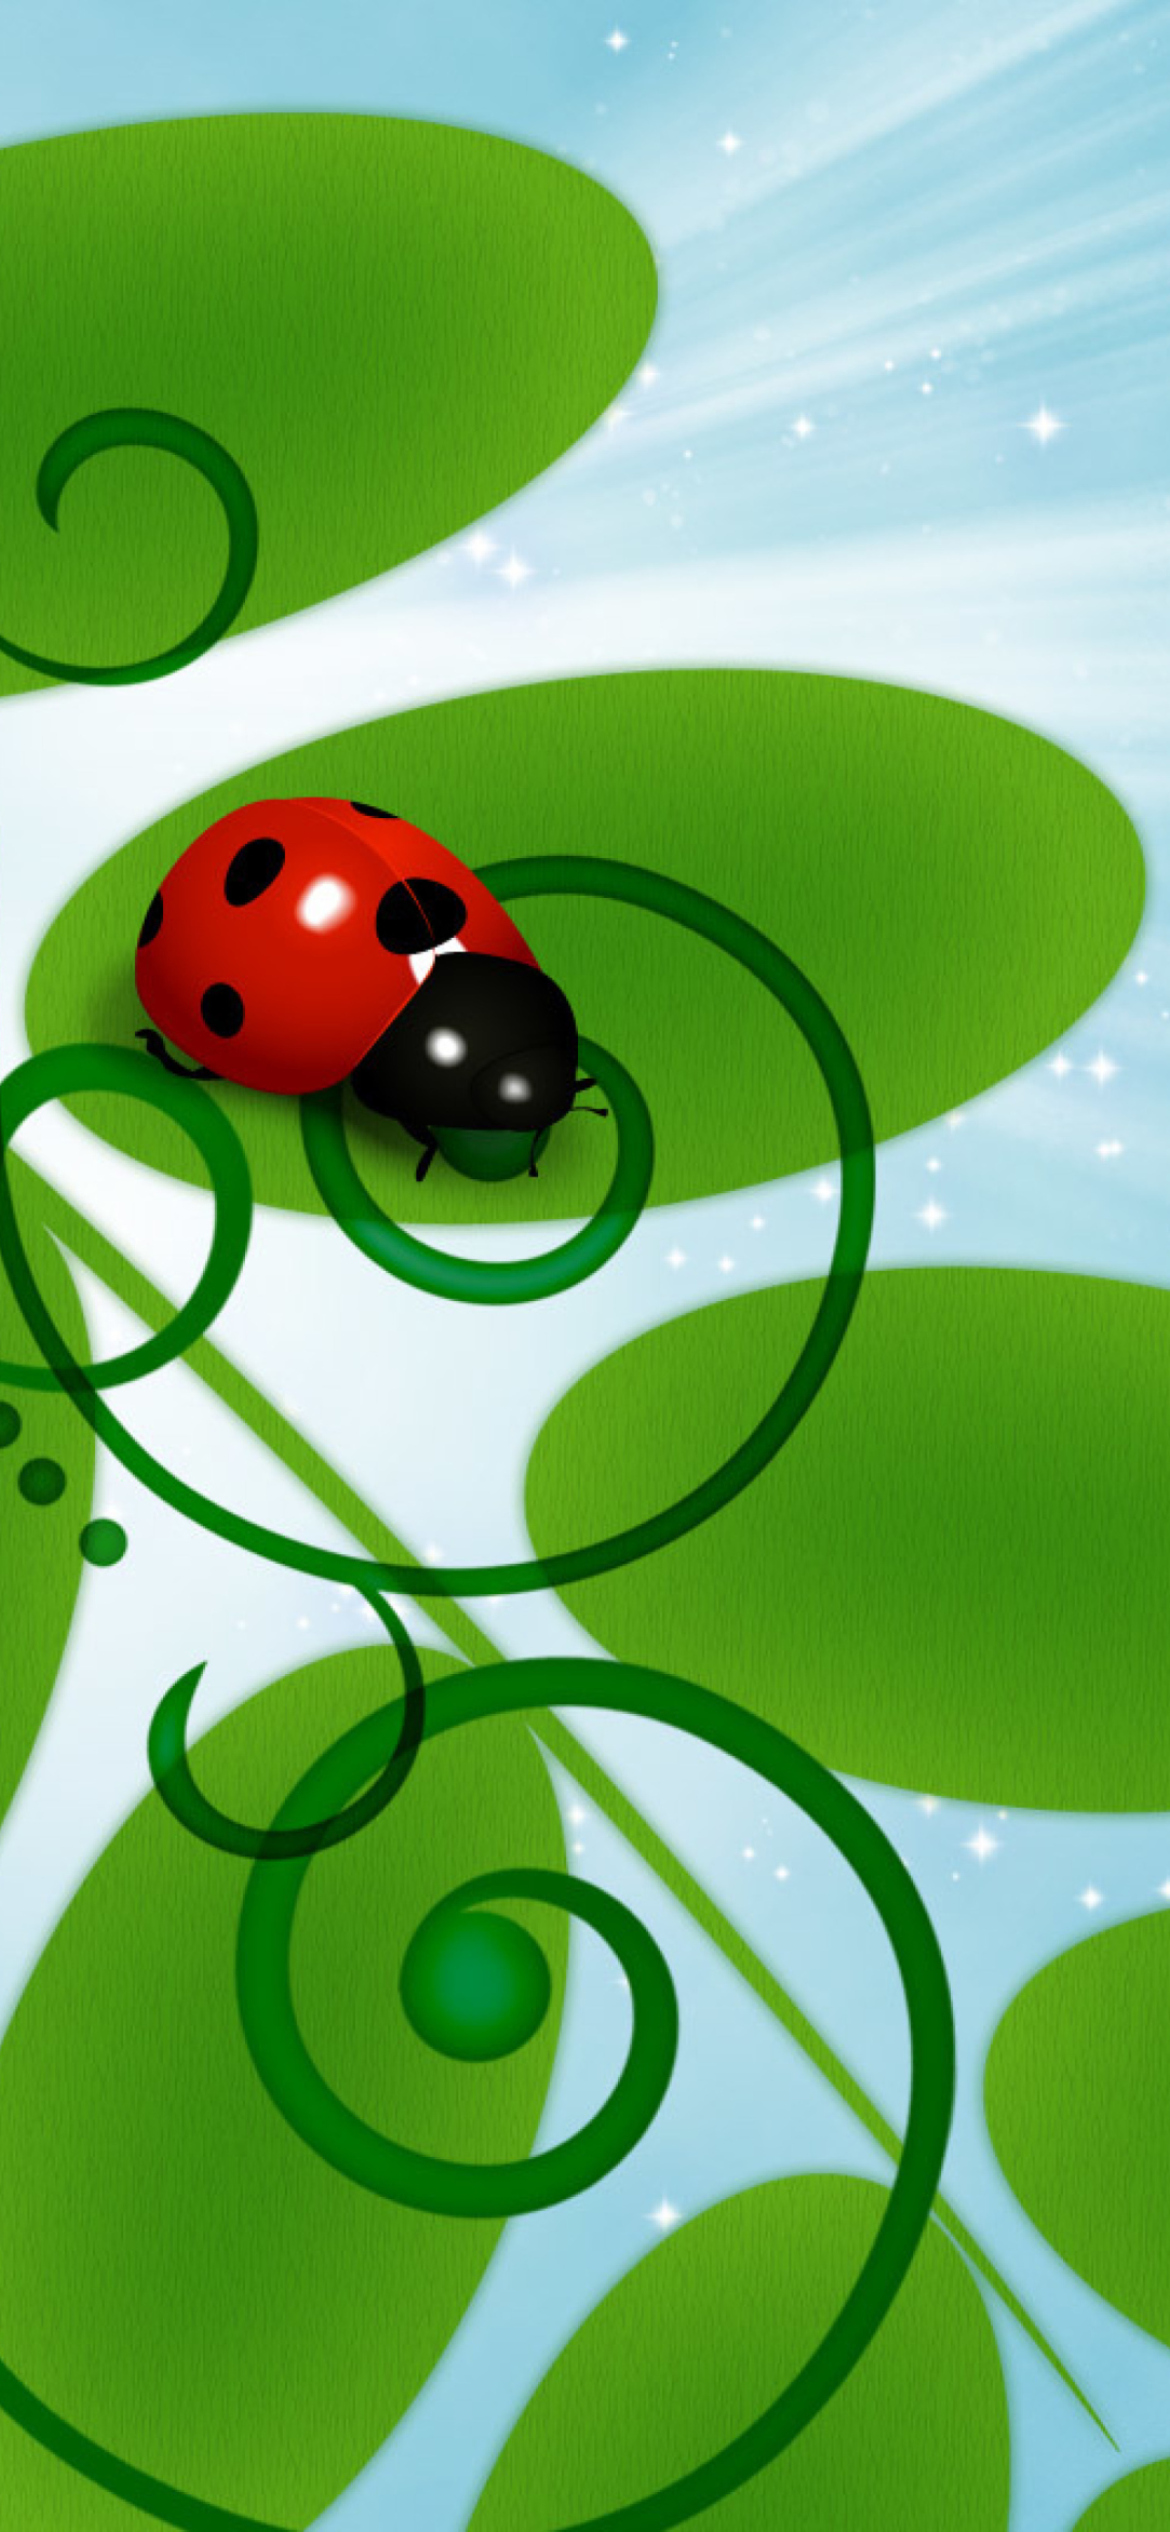 3D Ladybug Wallpaper for iPhone XR